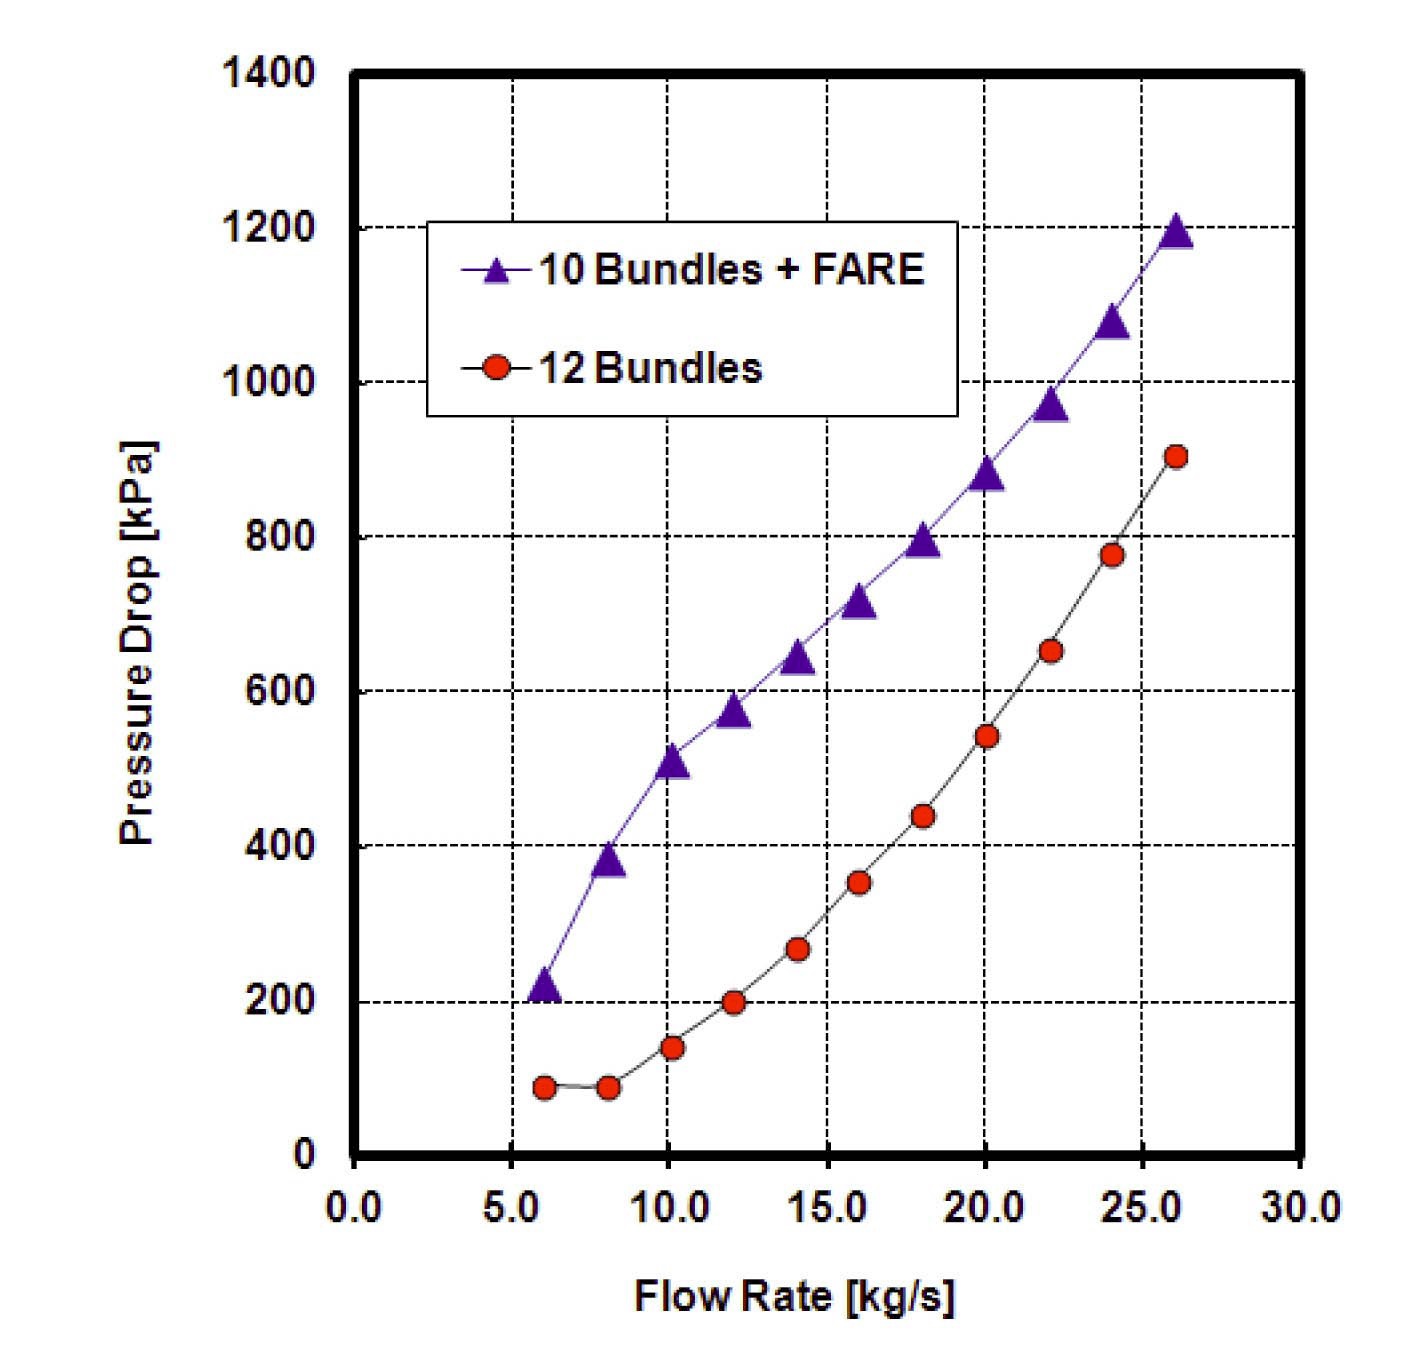 Channel Pressure Drop Caused by Fuel Bundles and the Original FARE Tool